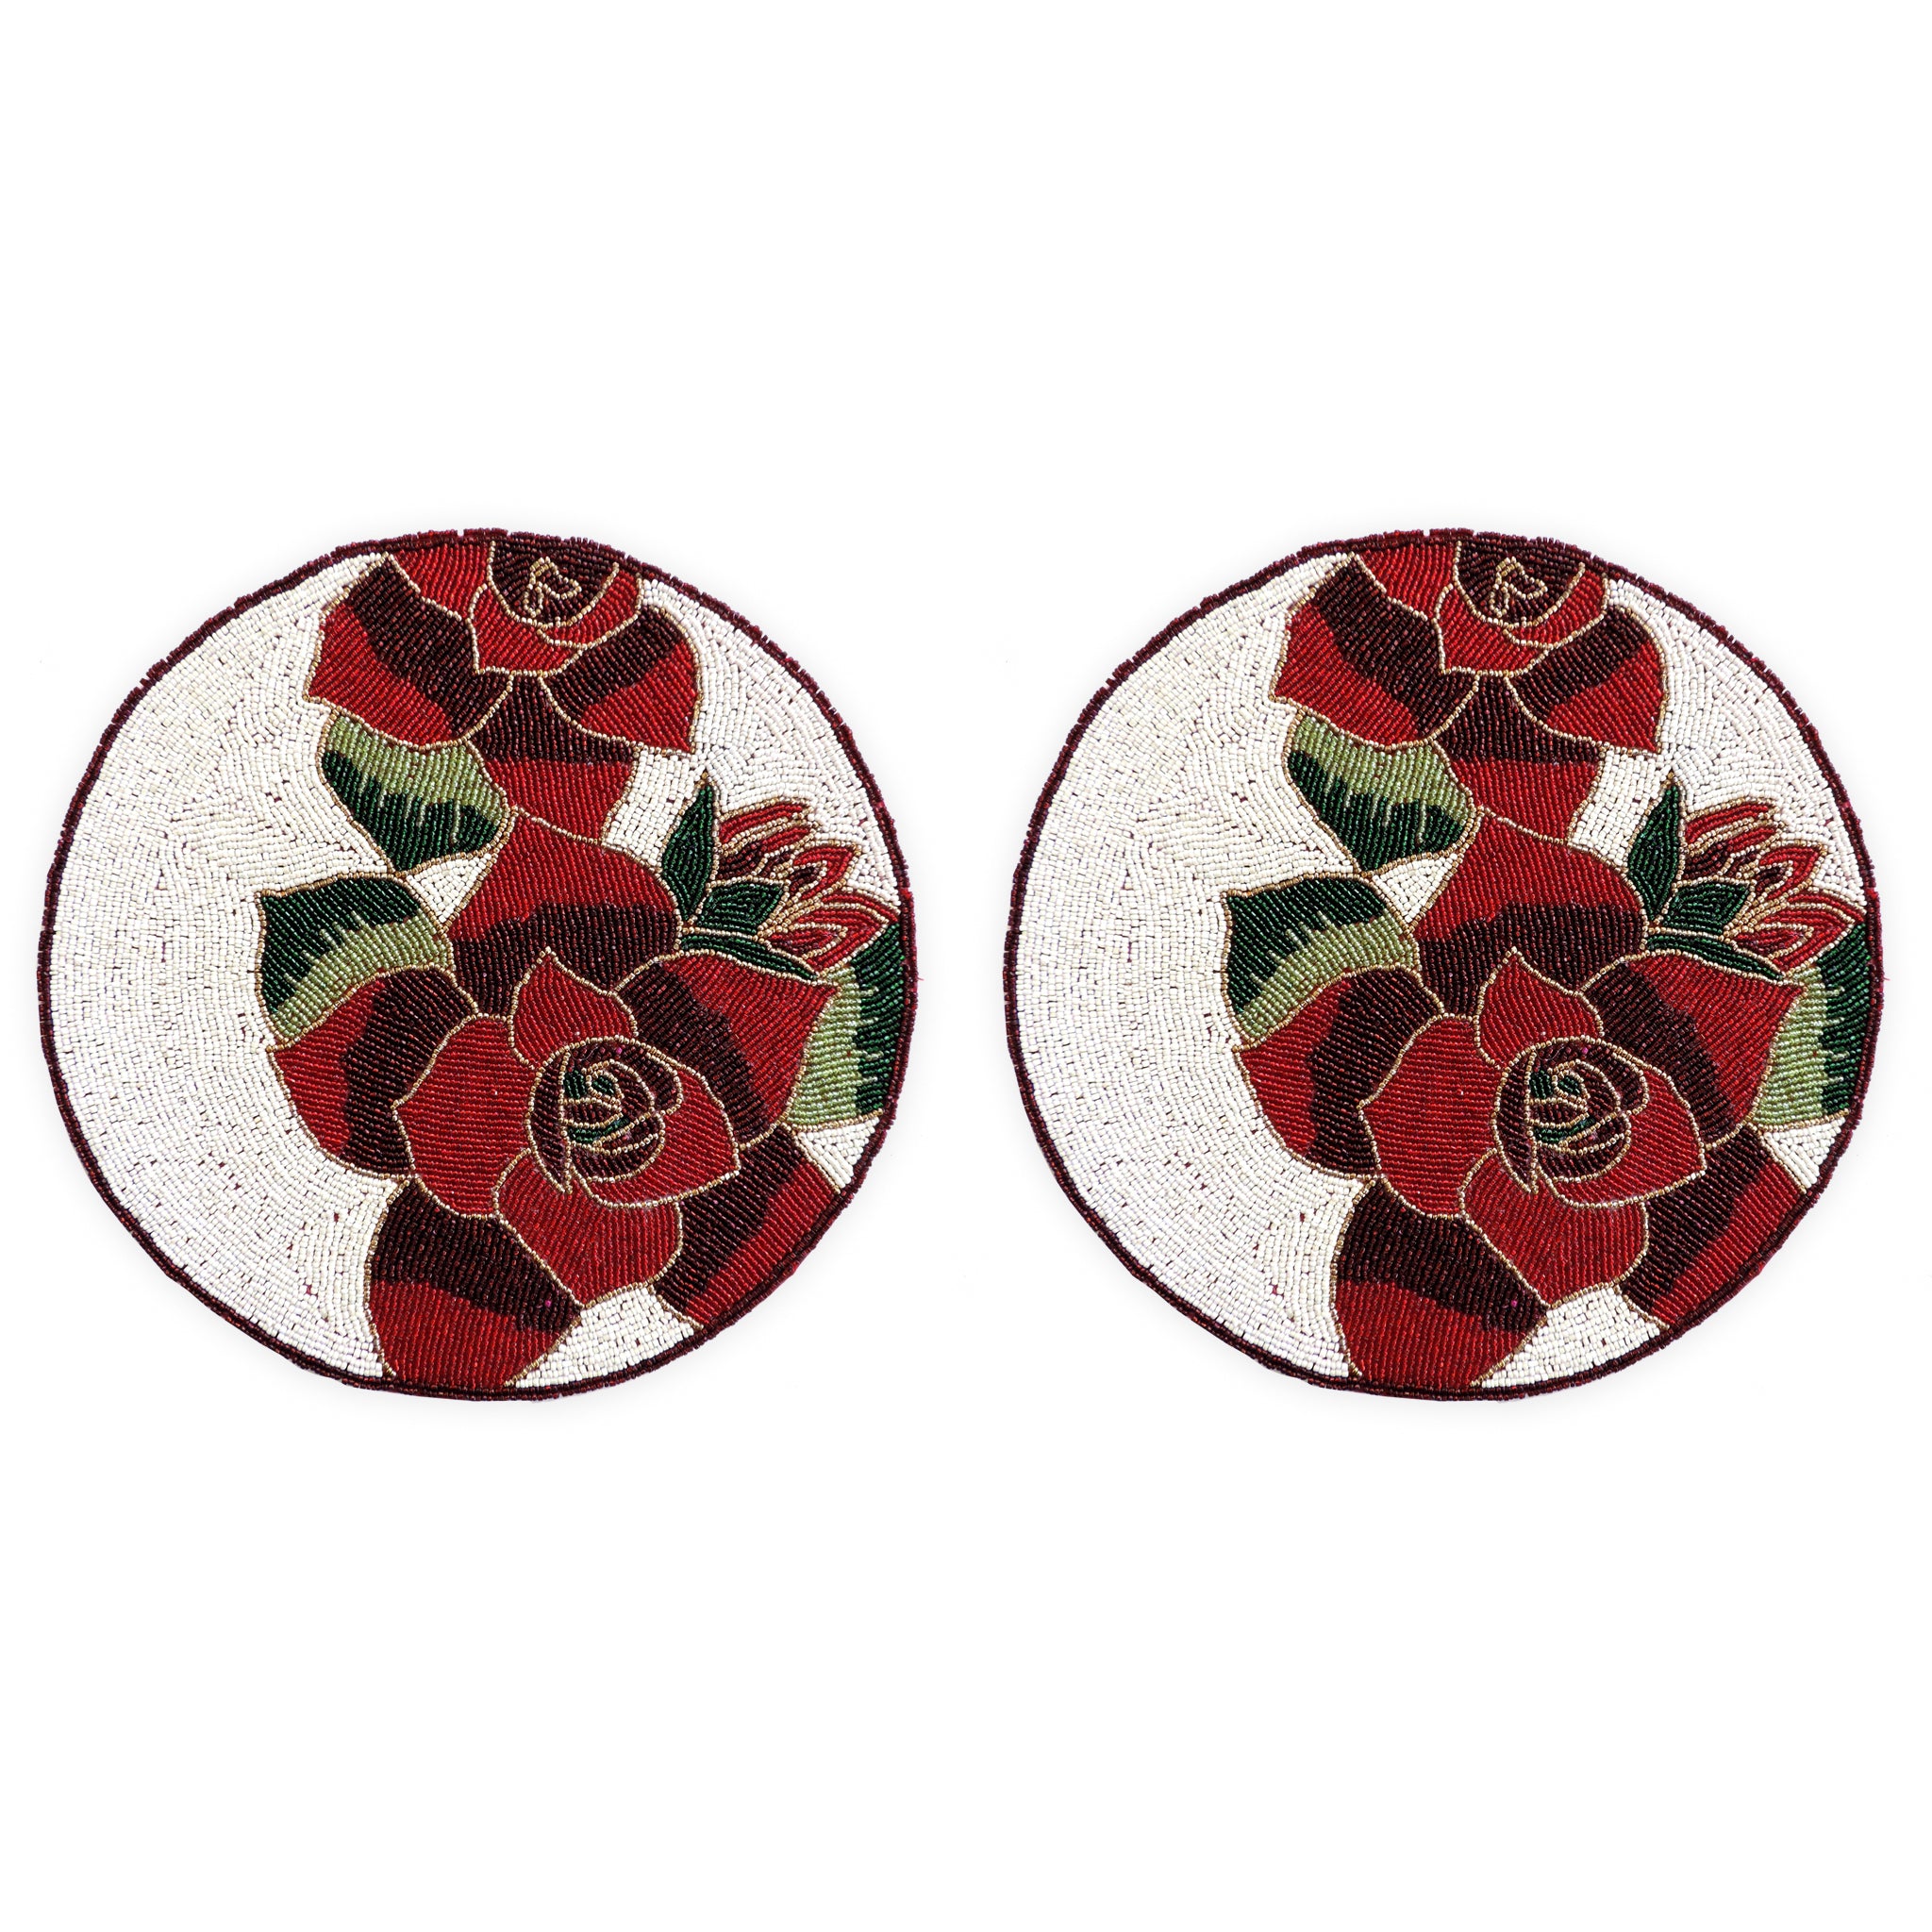 Glass Bead Embroidered Placemats, Chargers / Set of 2 / 14in. Round / Multicolor